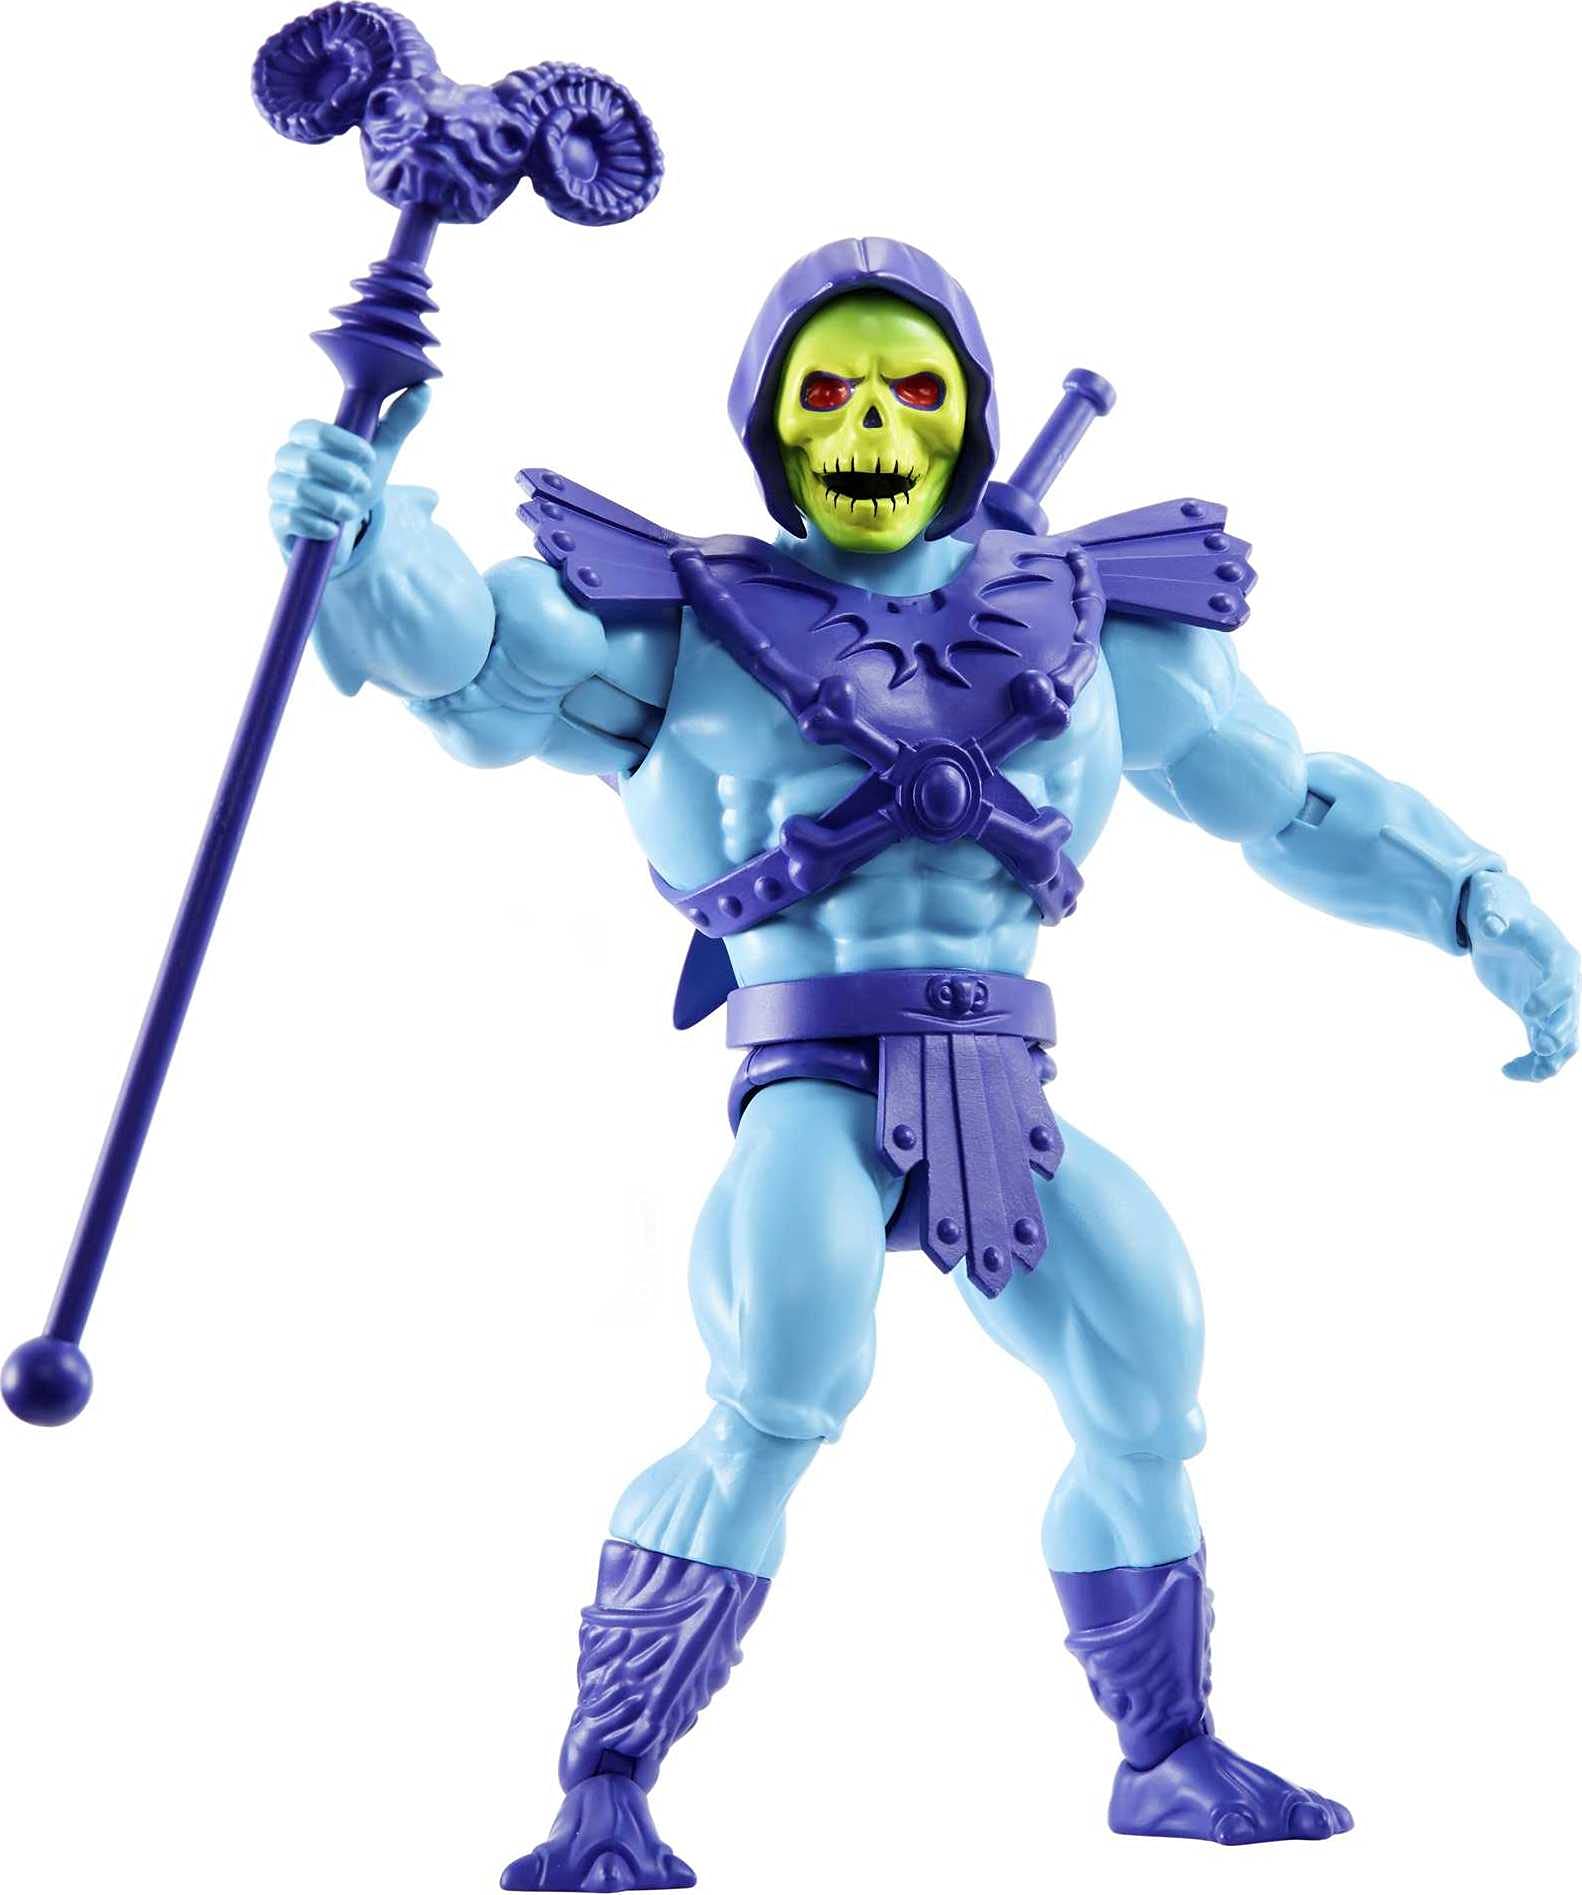 angie theaker recommends Pictures Of Skeletor From He Man